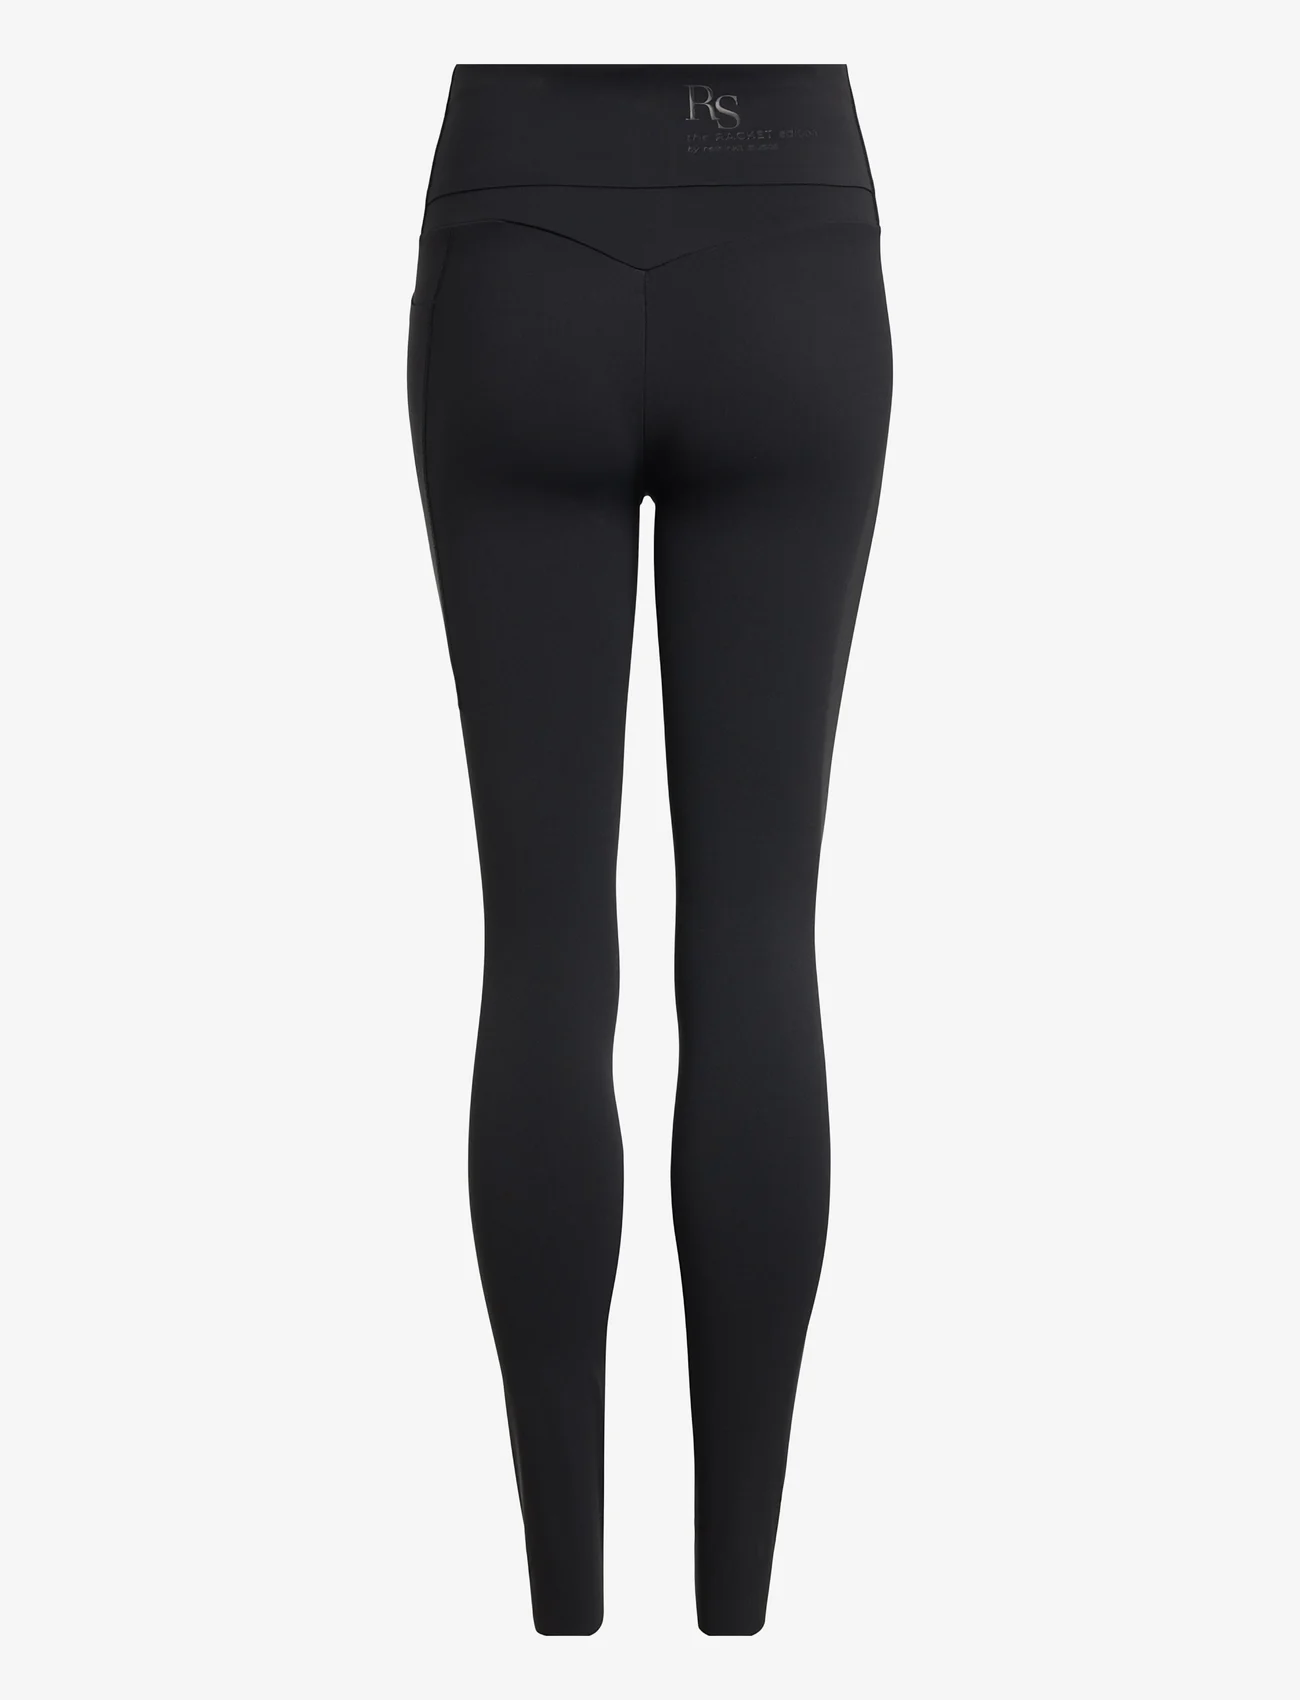 Rethinkit - Butter Soft Tights All Day - compression tights - black - 0